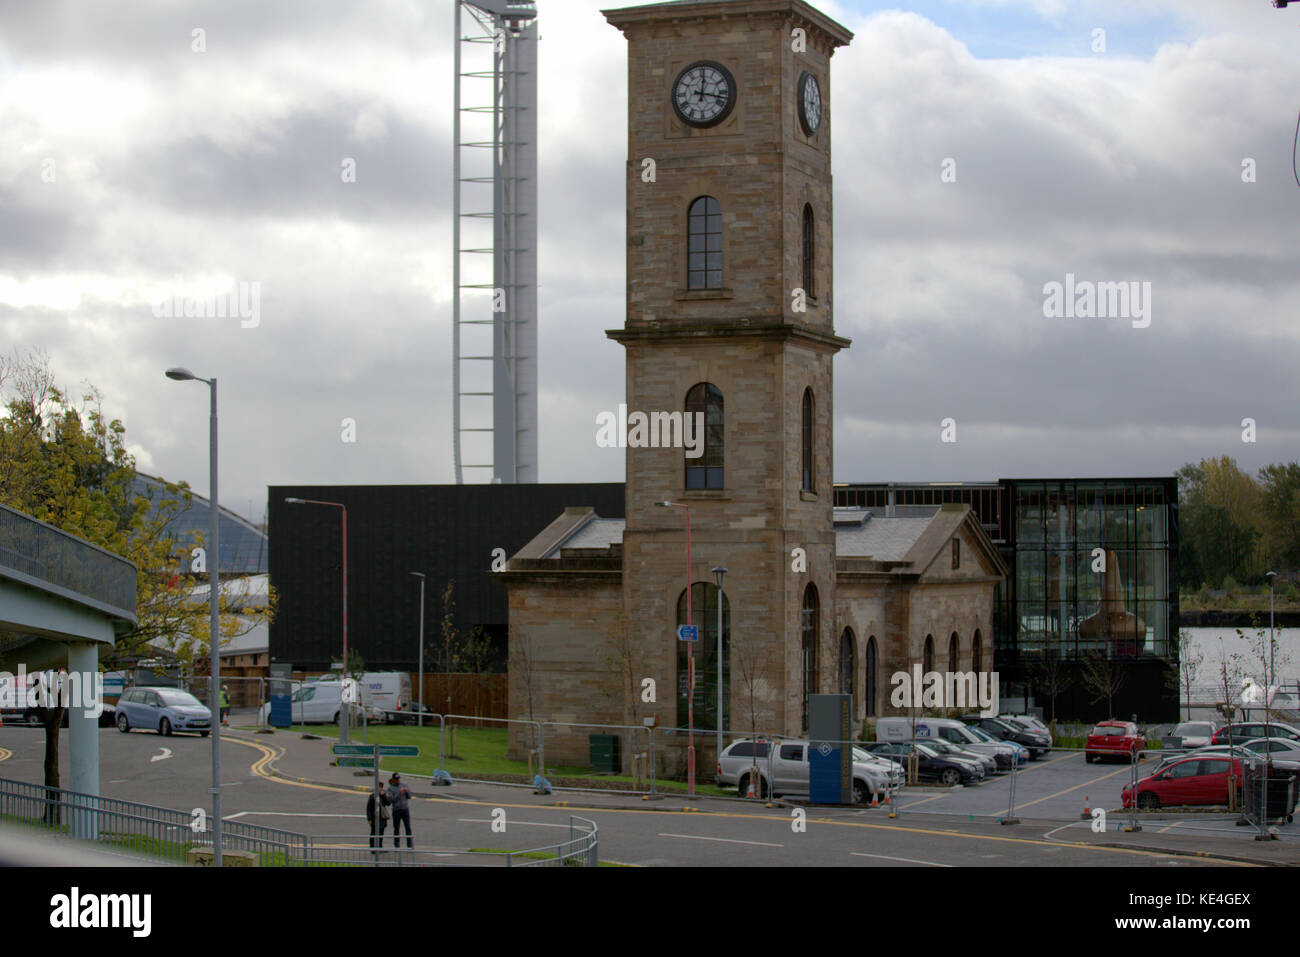 clock tower main building Clydeside distillery in Glasgow, Scotland Stock Photo